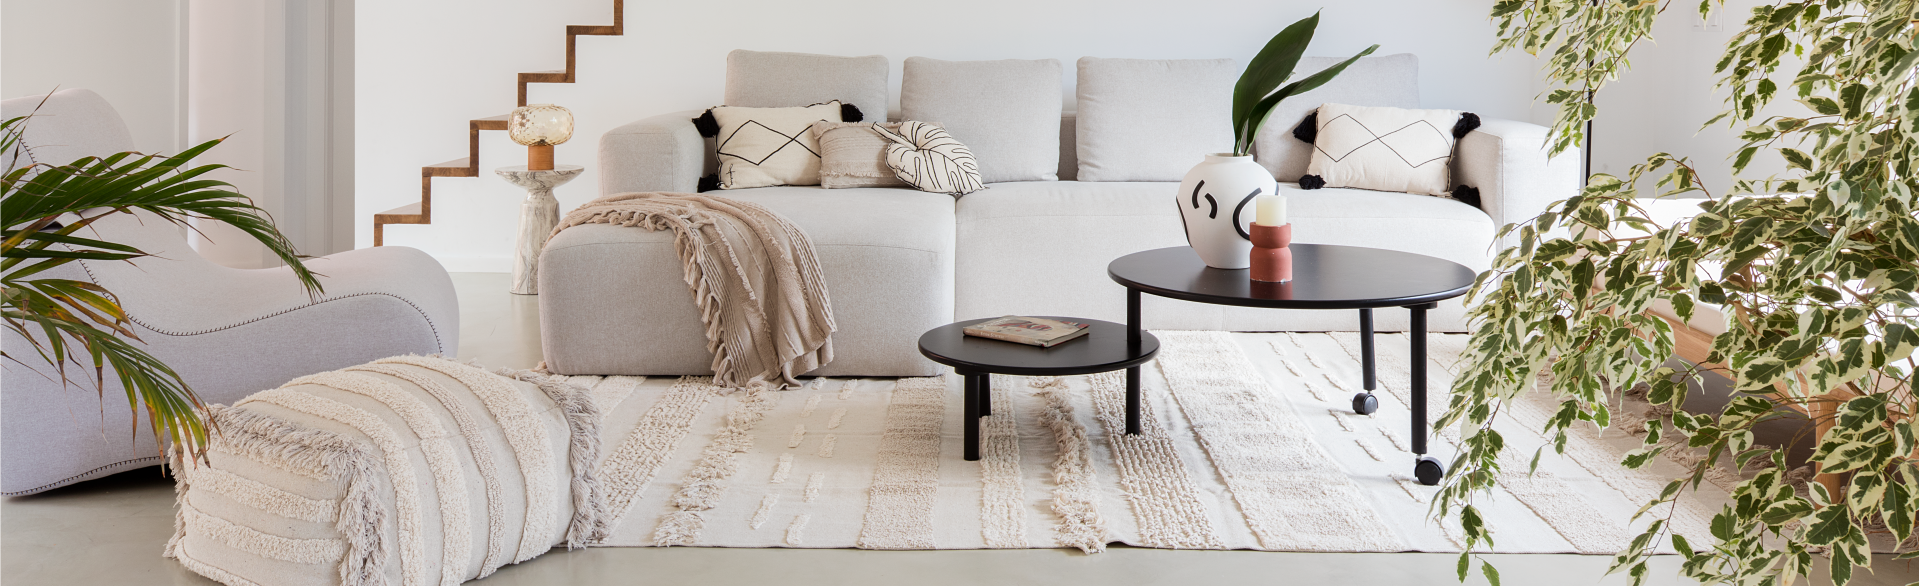 How not to choose a wrong rug? 5 simple and easy tips to help you!